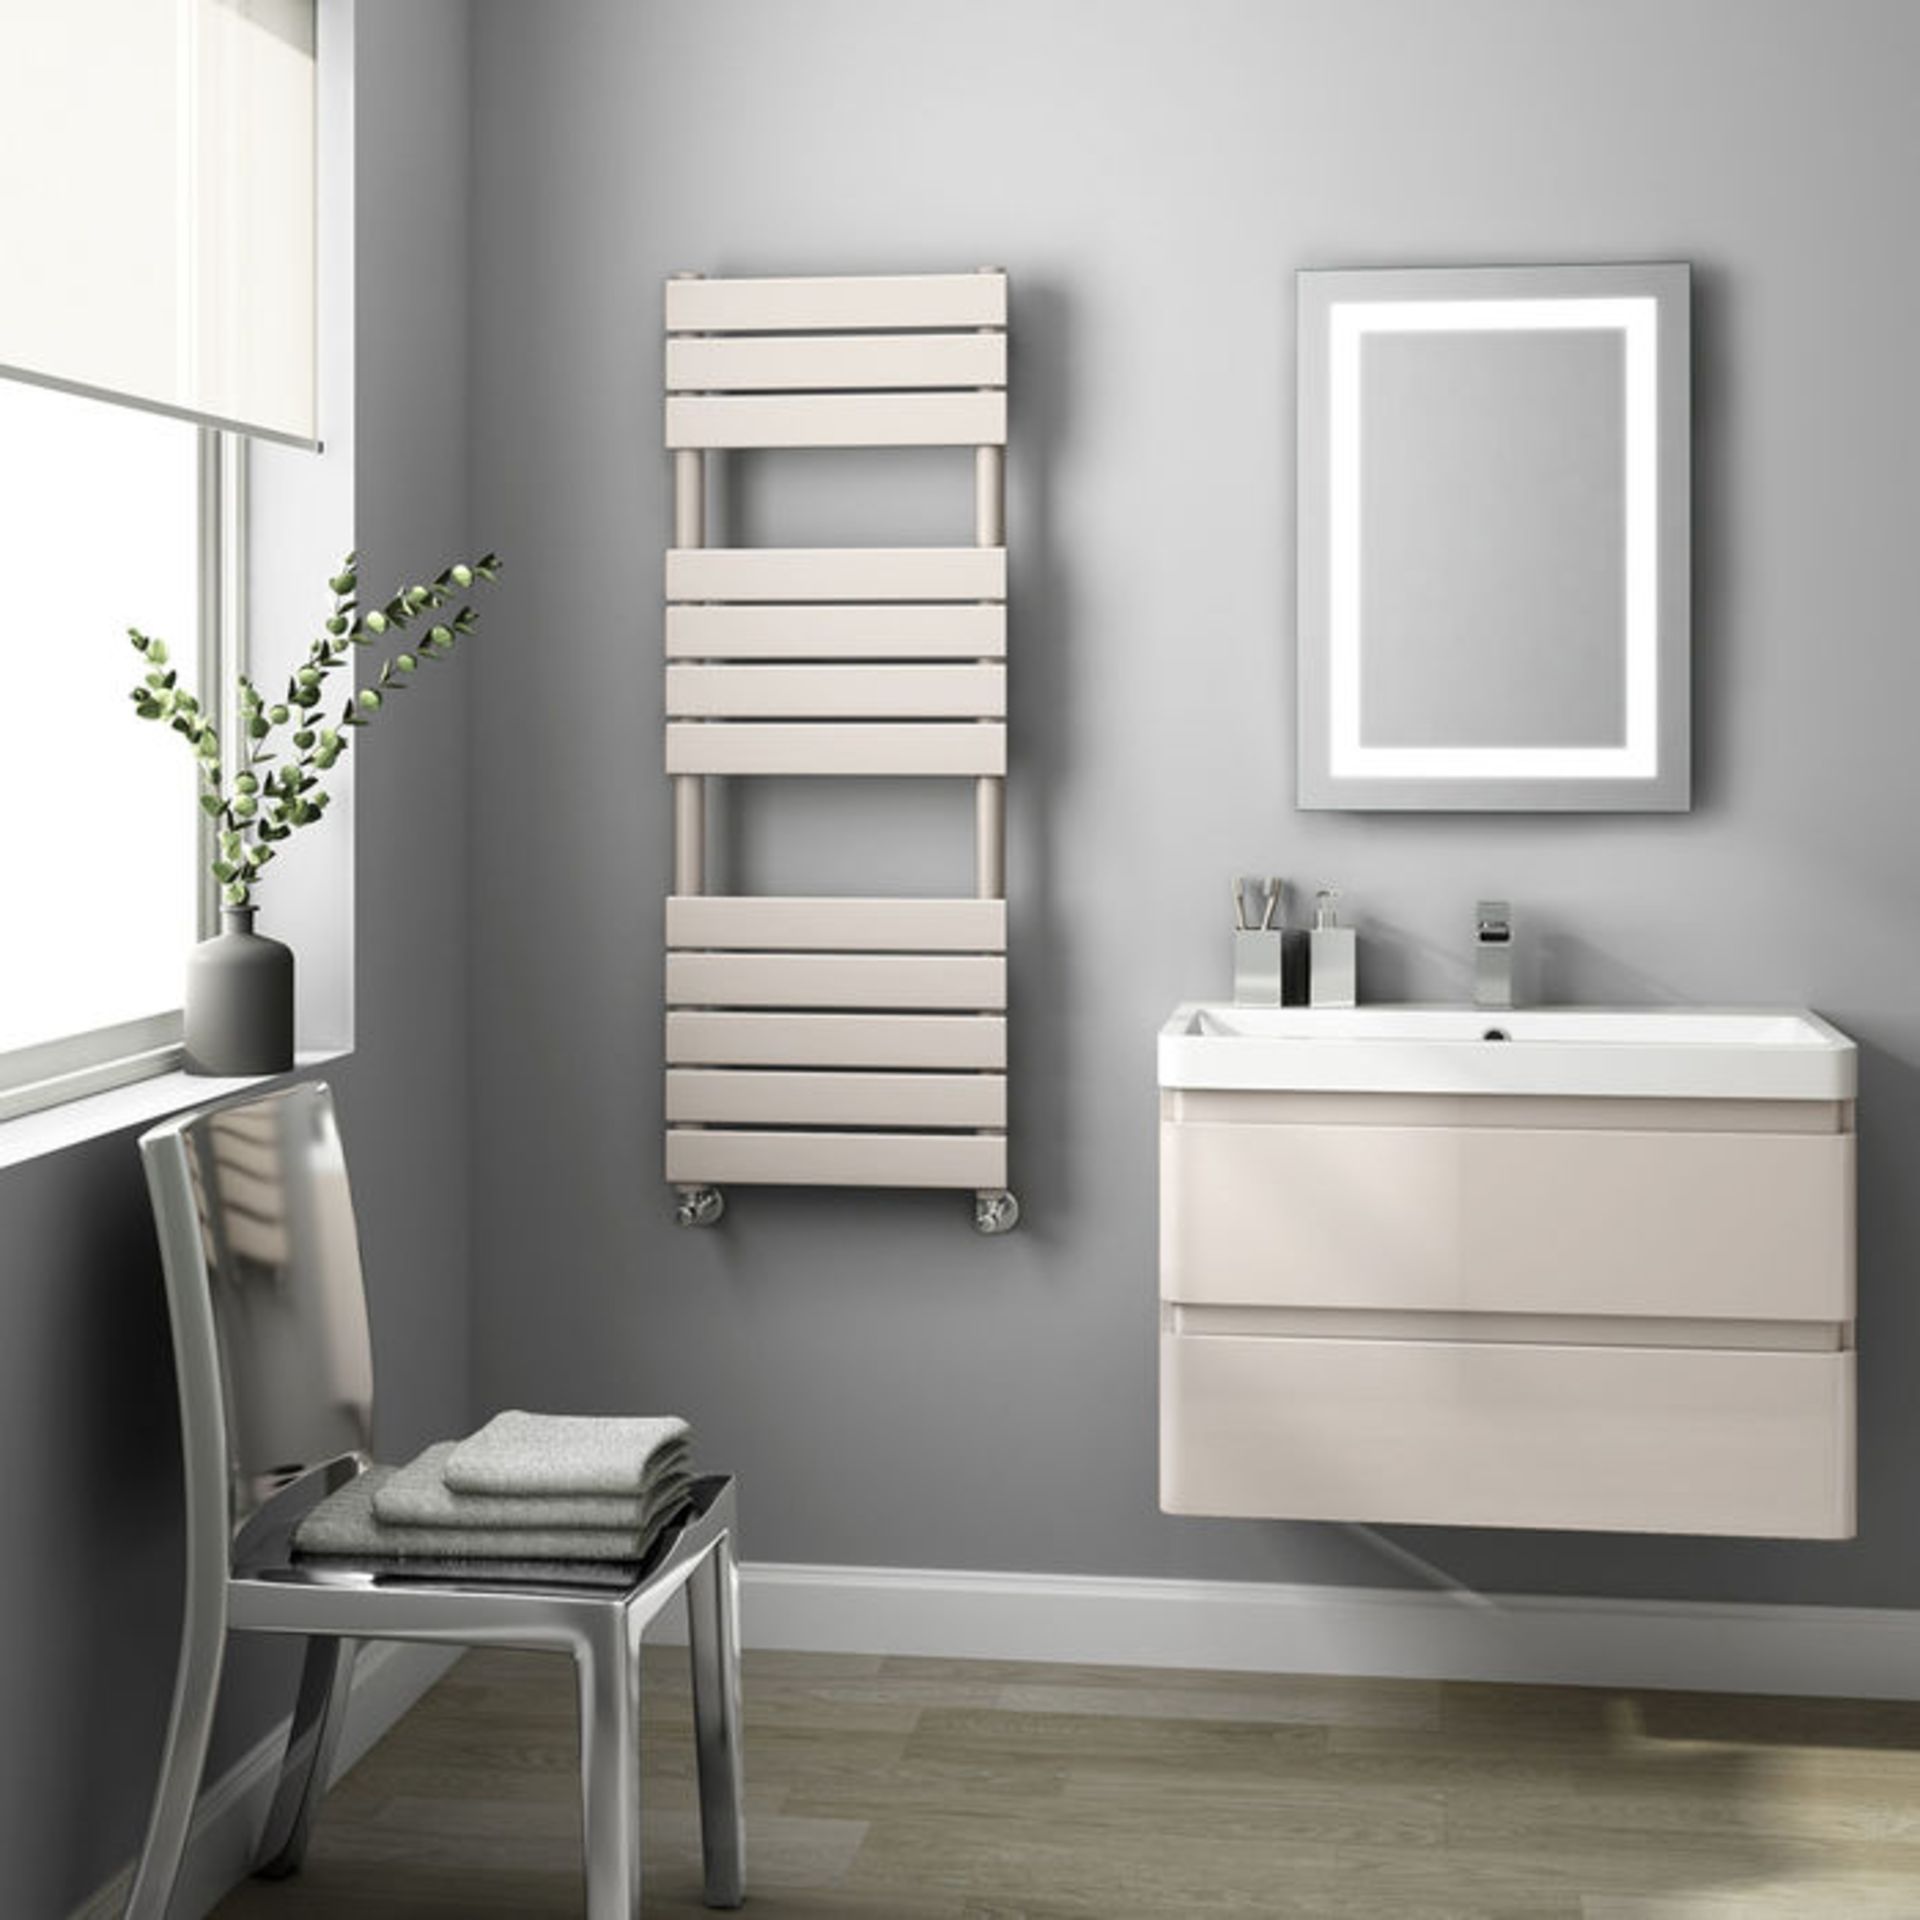 (HS79) 1000x450mm Latte Flat Panel Ladder Towel Radiator. Made from high quality low carbon steel - Image 2 of 3